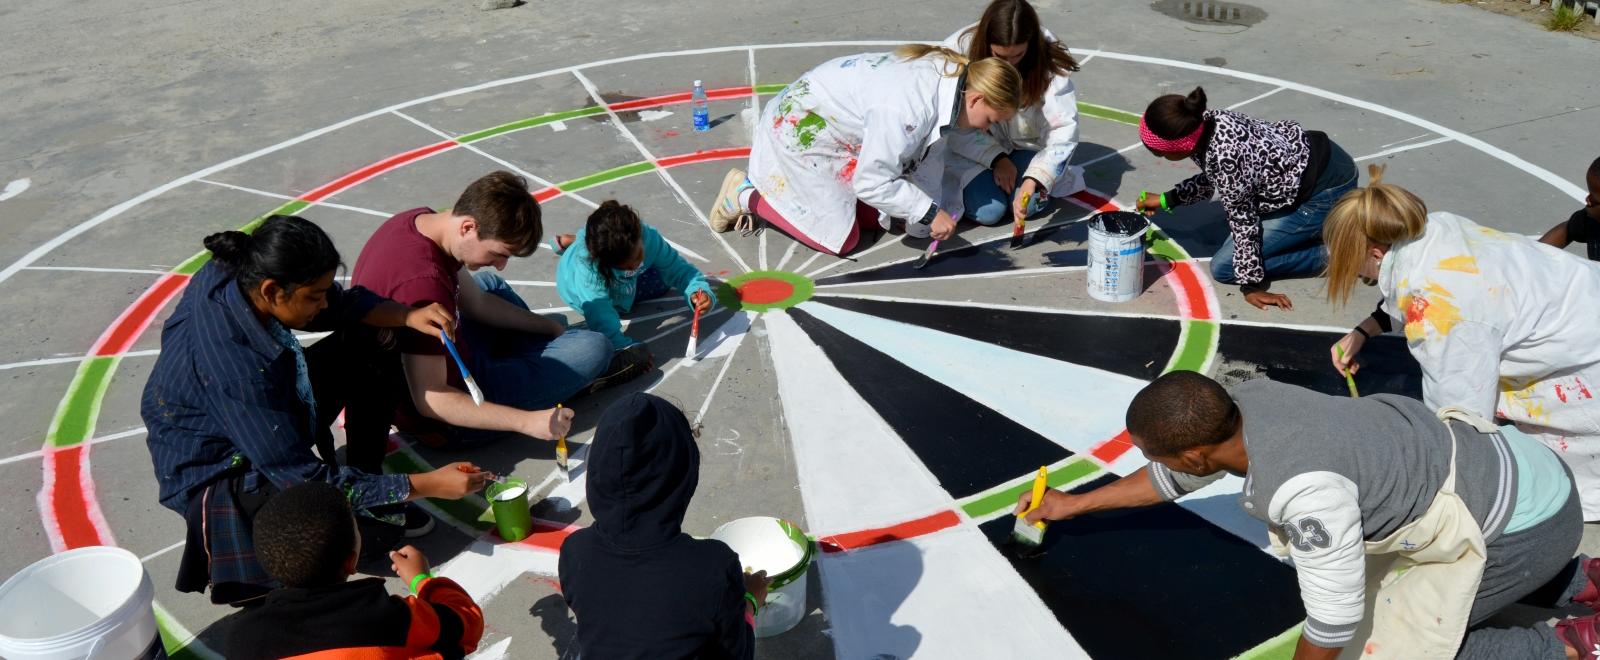 A Roundsquare group hosted by Tore’s Foundation paints a playground with local community members in Cape Town, South Africa.